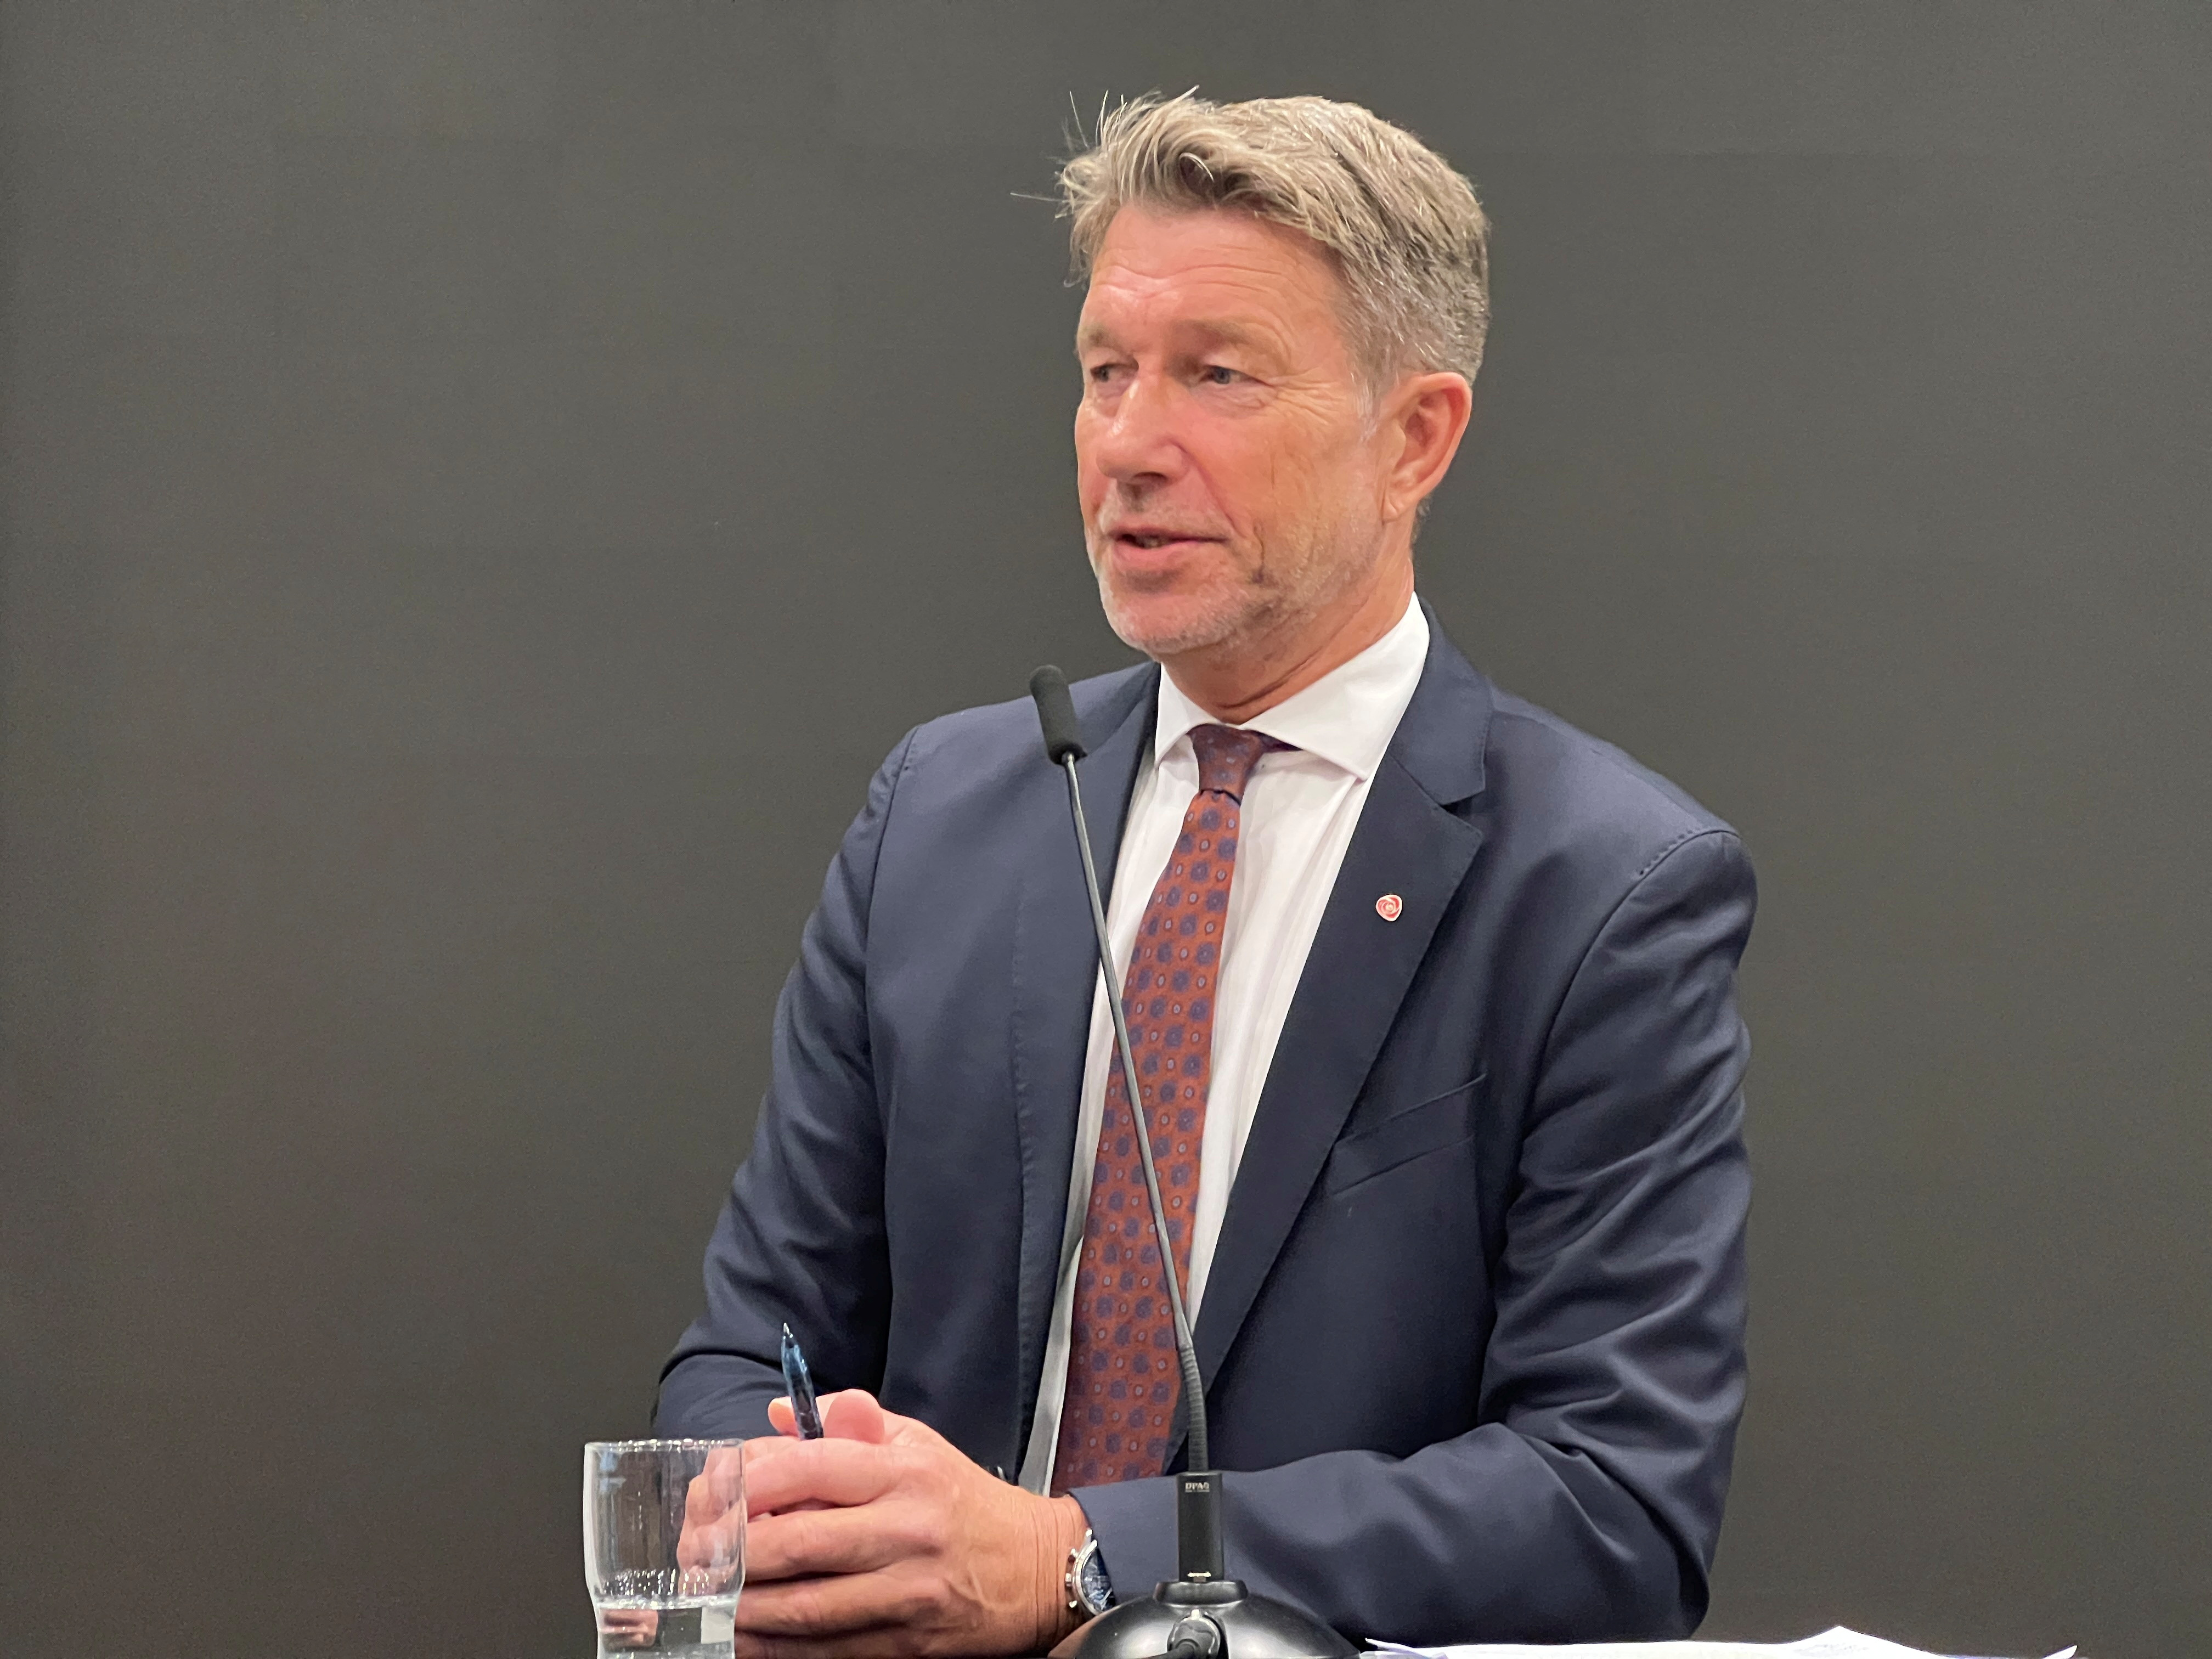 Norway's Oil and Energy Minister Terje Aasland talks to members of the media in Oslo